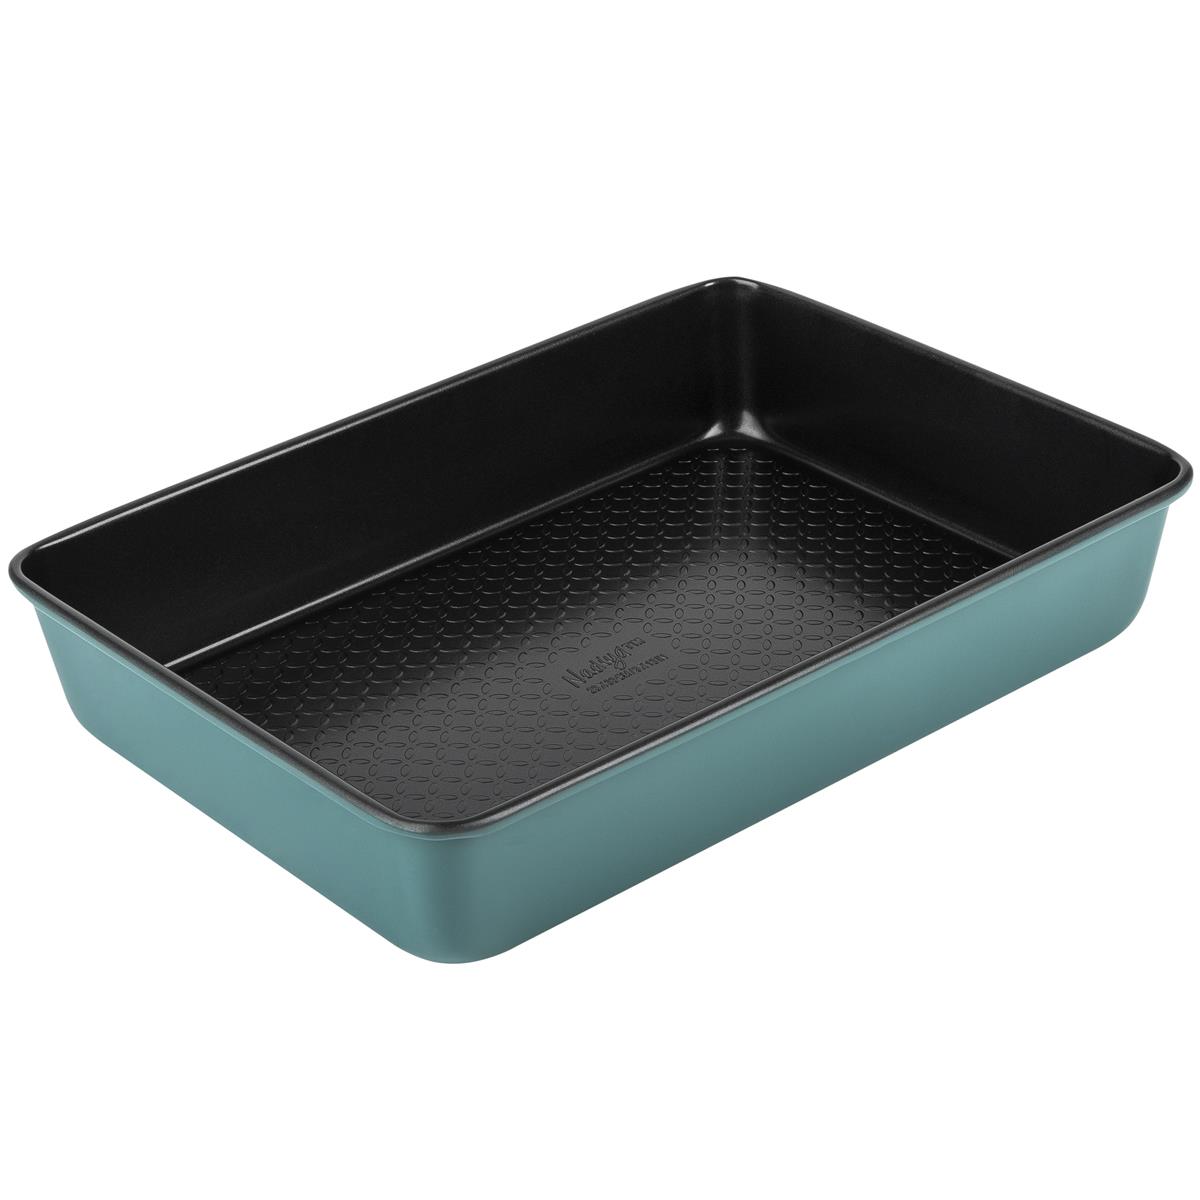 Is the bake tray in the Prestige Nadiya Hussain Non-Stick Oven and Bake Set suitable for cakes?